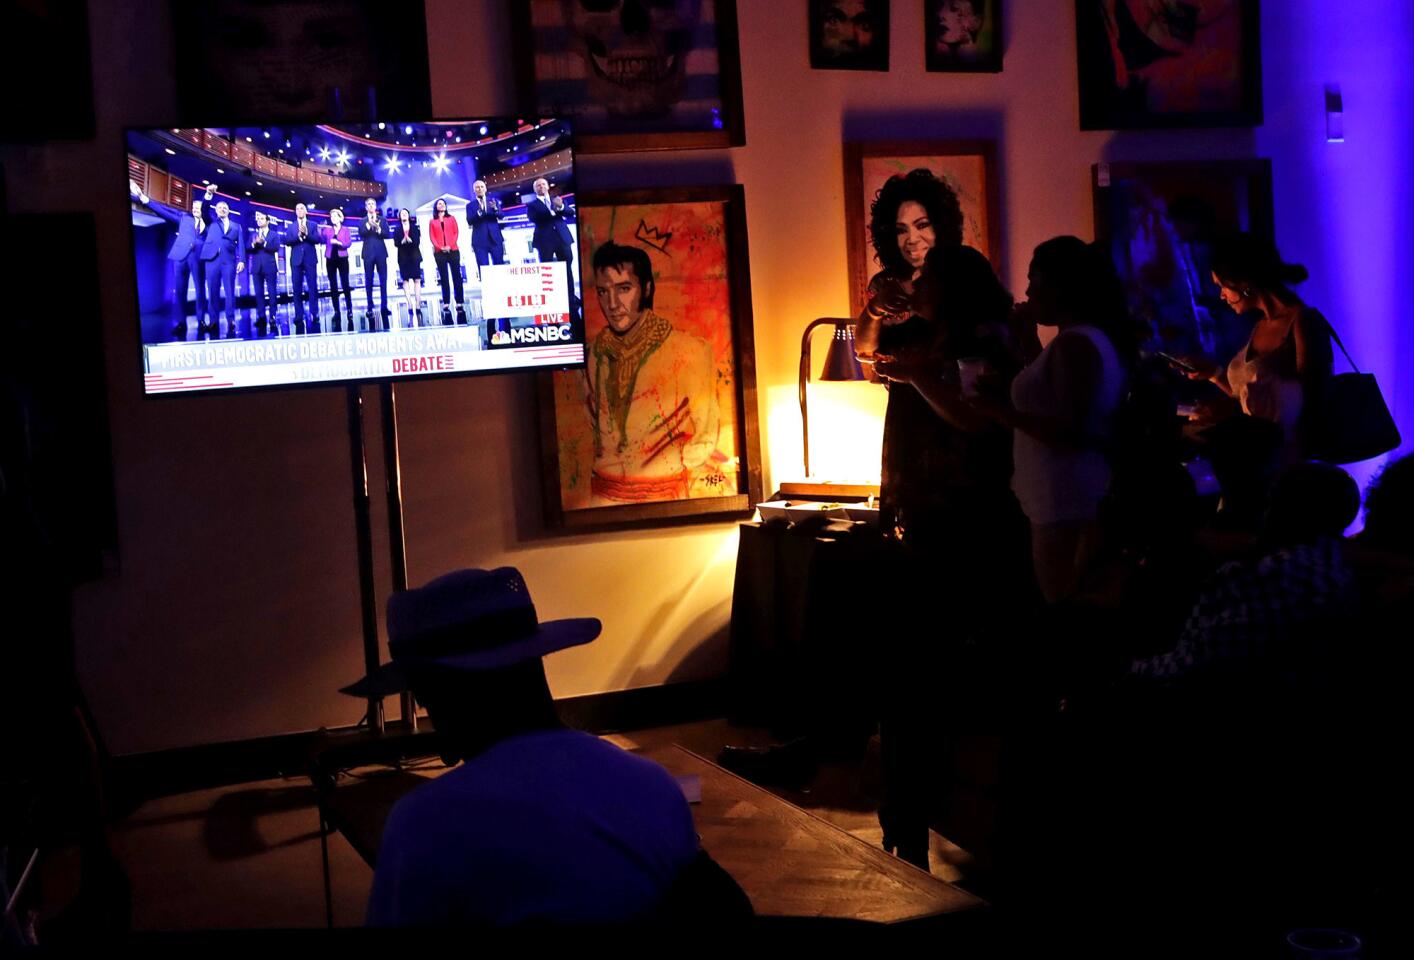 People watch a Democratic presidential debate during a watch party hosted by the former Florida Democratic gubernatorial candidate Andrew Gillum, Wednesday, June 26, 2019, in Miami.